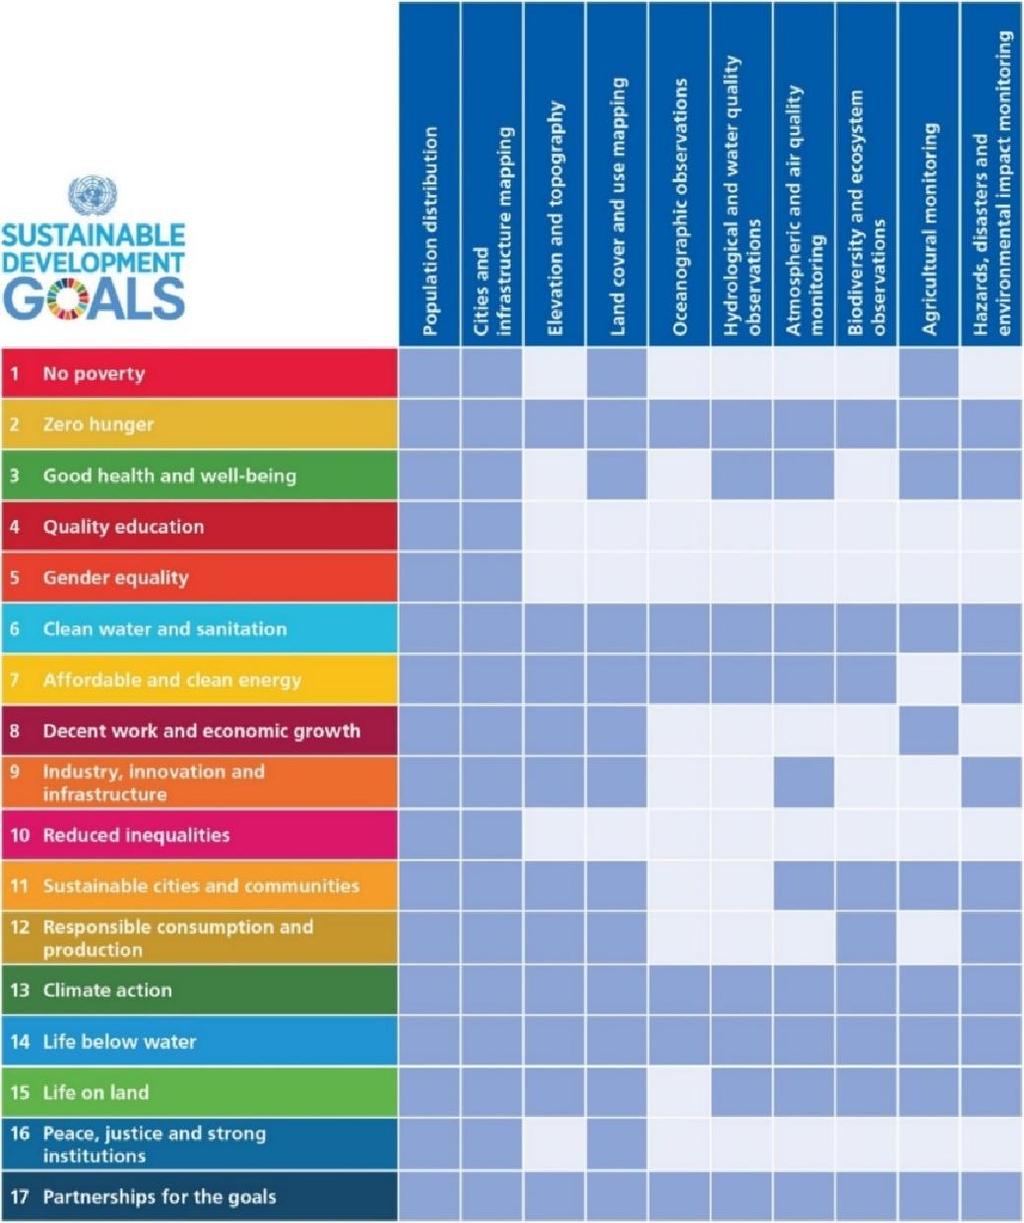 GEO EO4SDGs initiative Realize the potential of EO and geospatial information to advance the 2030 Agenda and enable societal benefits through achievement of the Sustainable Development Goals.